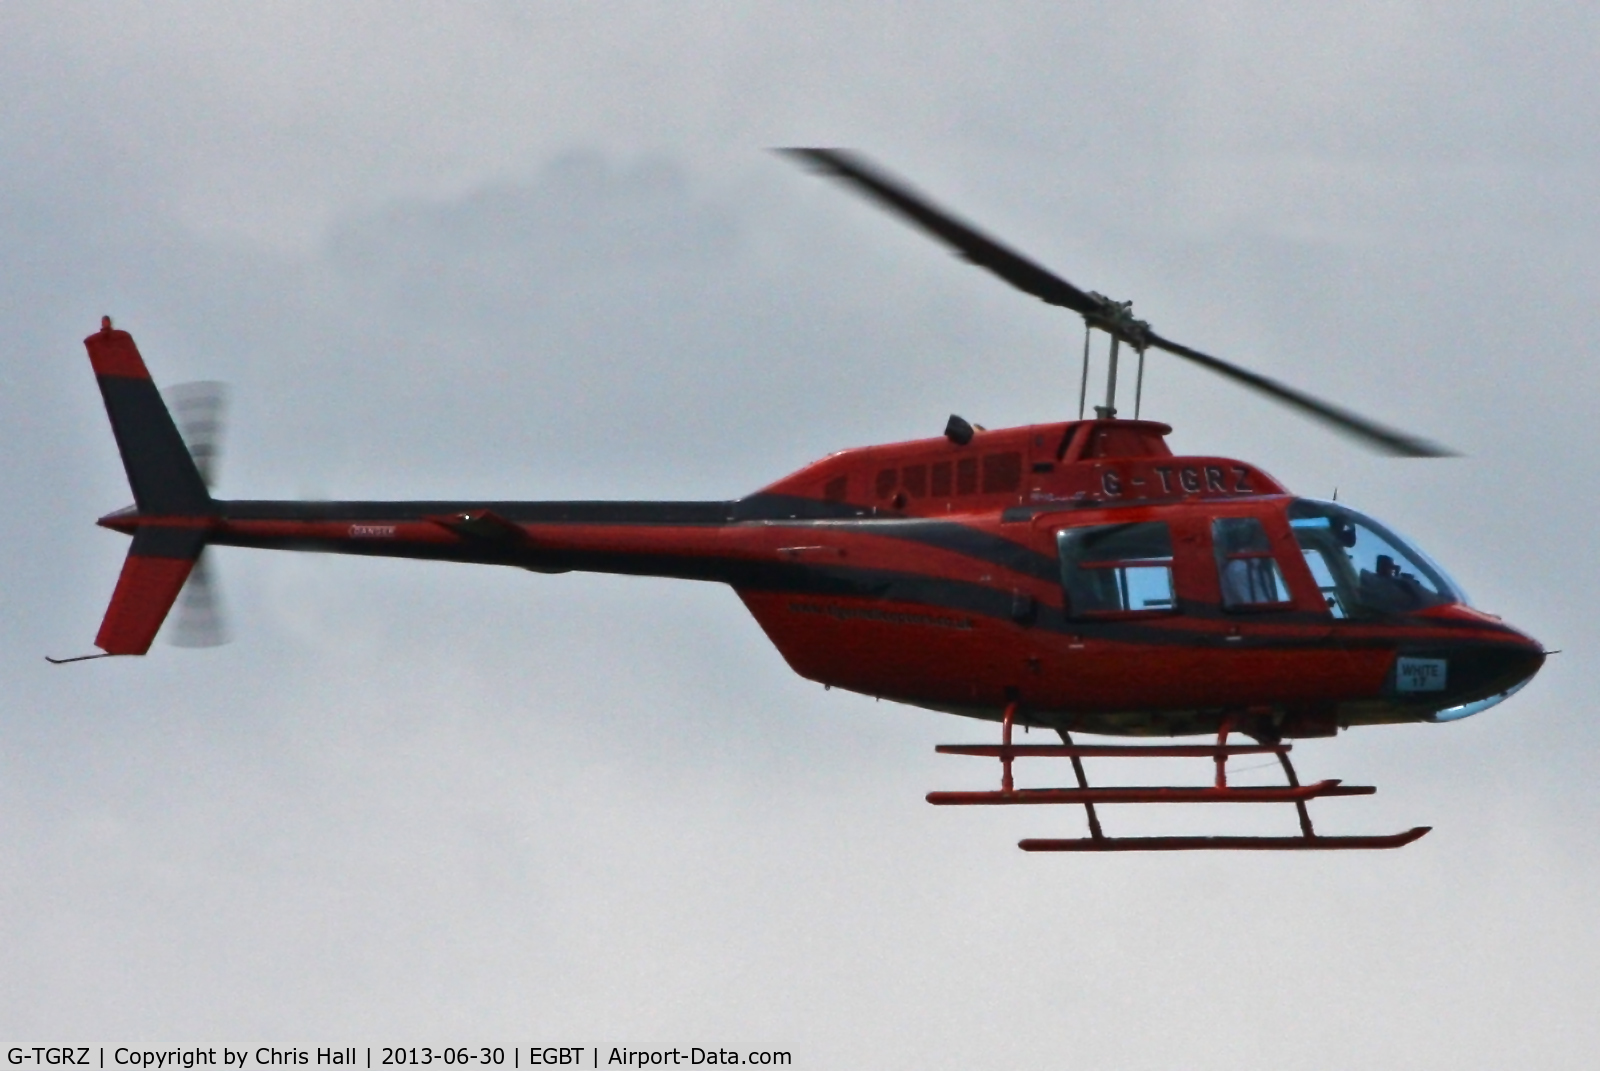 G-TGRZ, 1977 Bell 206B JetRanger II C/N 2288, being used for ferrying race fans to the British F1 Grand Prix at Silverstone